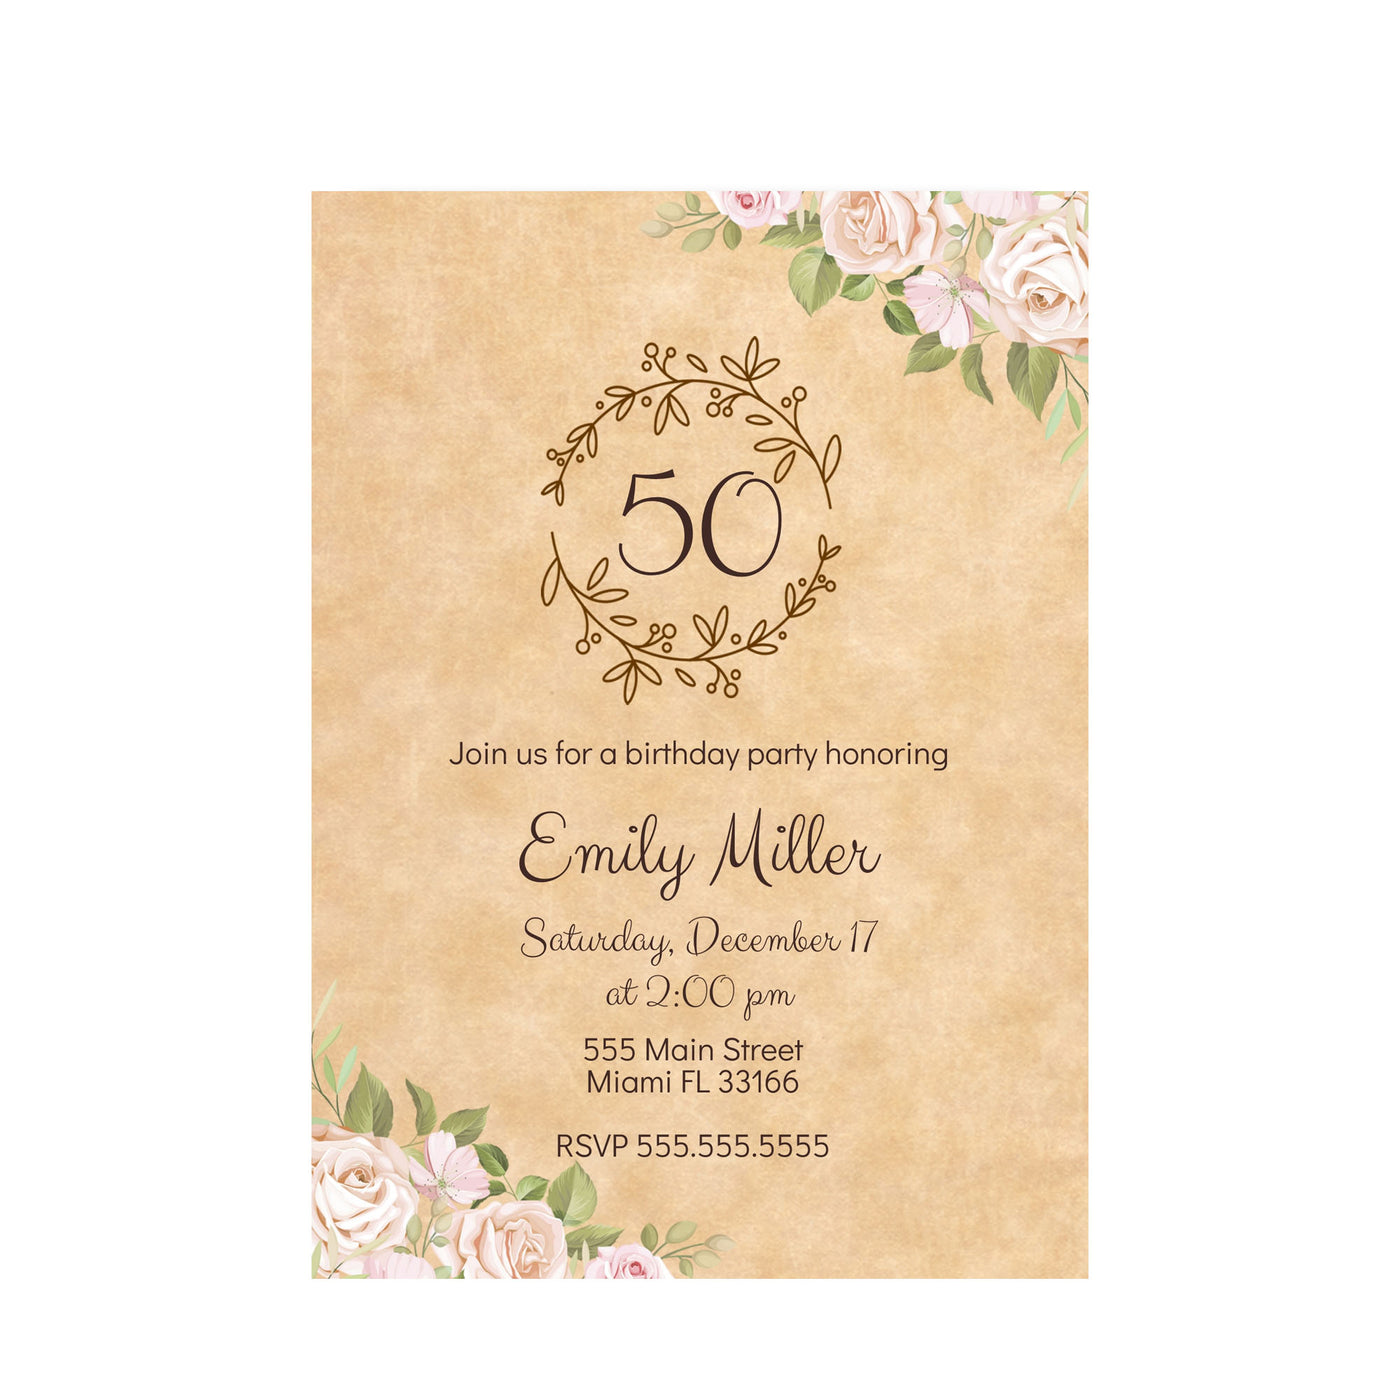 Rustic floral roses birthday any age invitation vintage printable ...